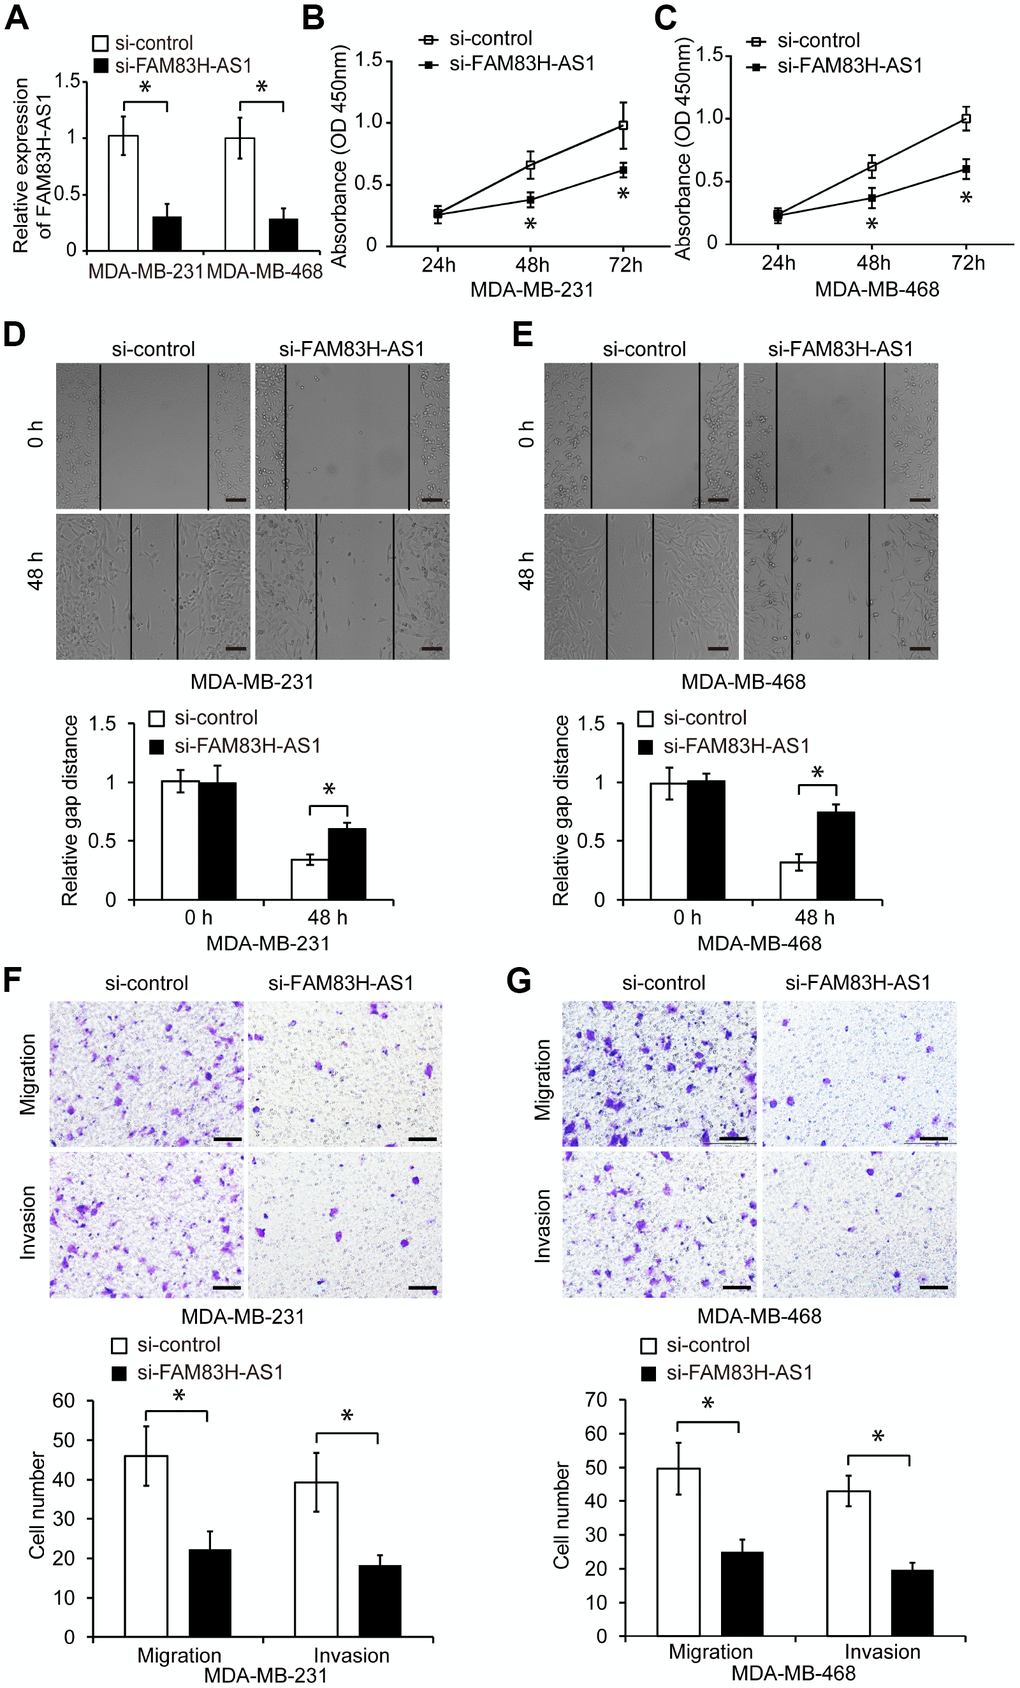 FAM83H-AS1 suppression inhibits TNBC cell proliferation, migration, and invasion. (A) qRT-PCR of FAM83H-AS1 expression in TNBC cells transfected with si-control or si-FAM83H-AS1 RNA. (B, C) Proliferation of TNBC cells transfected with si-control or si-FAM83H-AS1 RNA, analyzed by CCK8 assay. (D, E) Wound healing assay of the migration capacity of MDA-MB-231 and MDA-MB-468 cells transfected with si-control or si-FAM83H-AS1. (F, G) Migration and invasion of MDA-MB-231 and MDA-MB-468 cells transfected with si-control or si-FAM83H-AS1. Scale bars, 100 μm. * p 